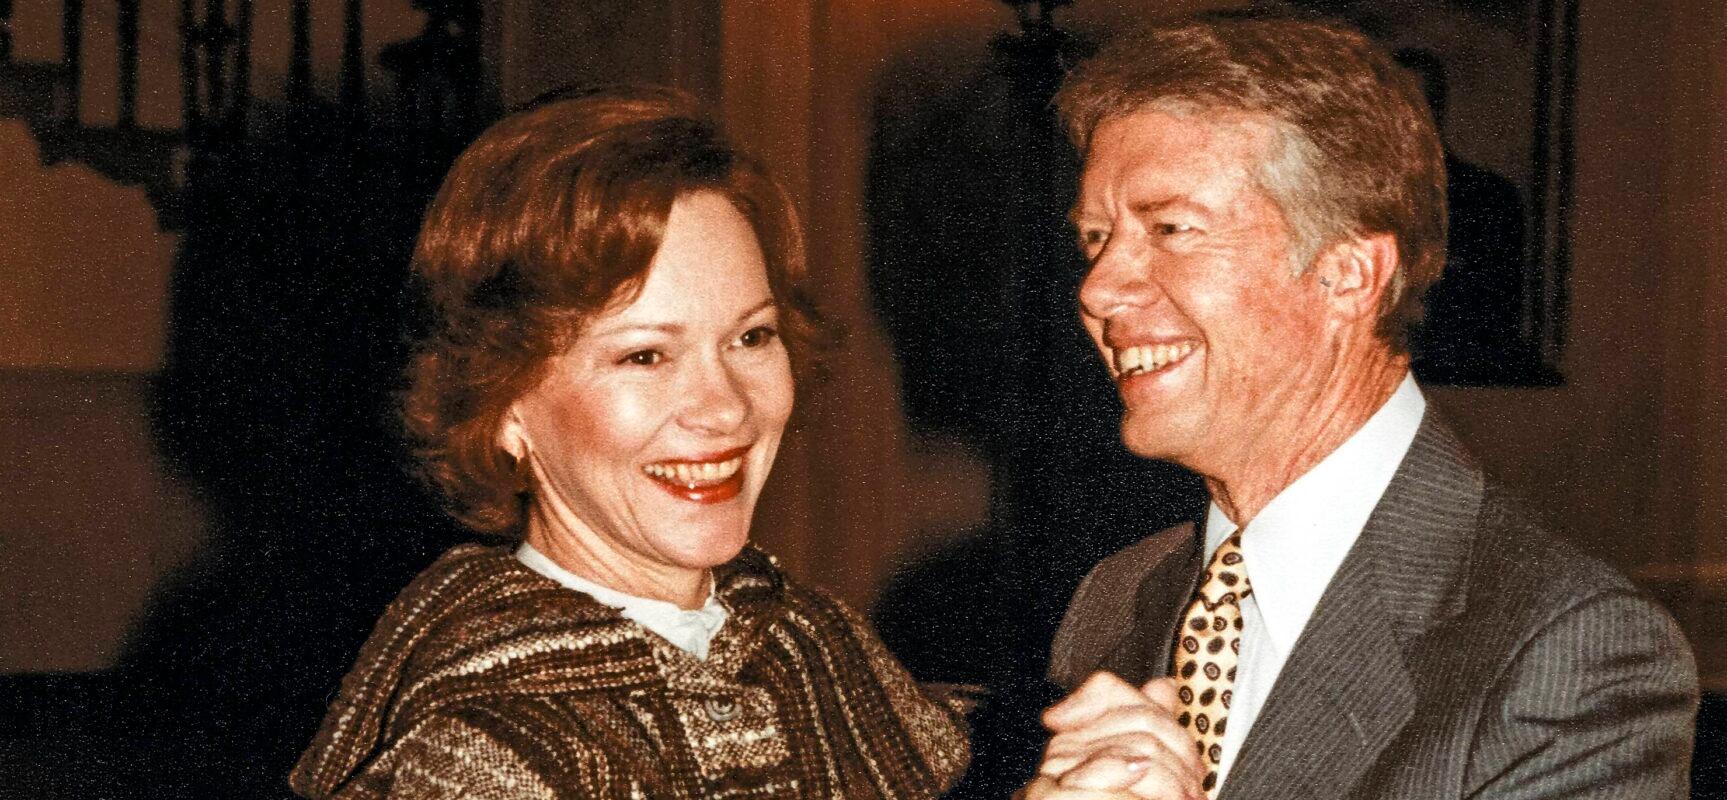 Sad News Of Jimmy Carter’s ‘Final Chapter’ Triggering Long-Time Admirers